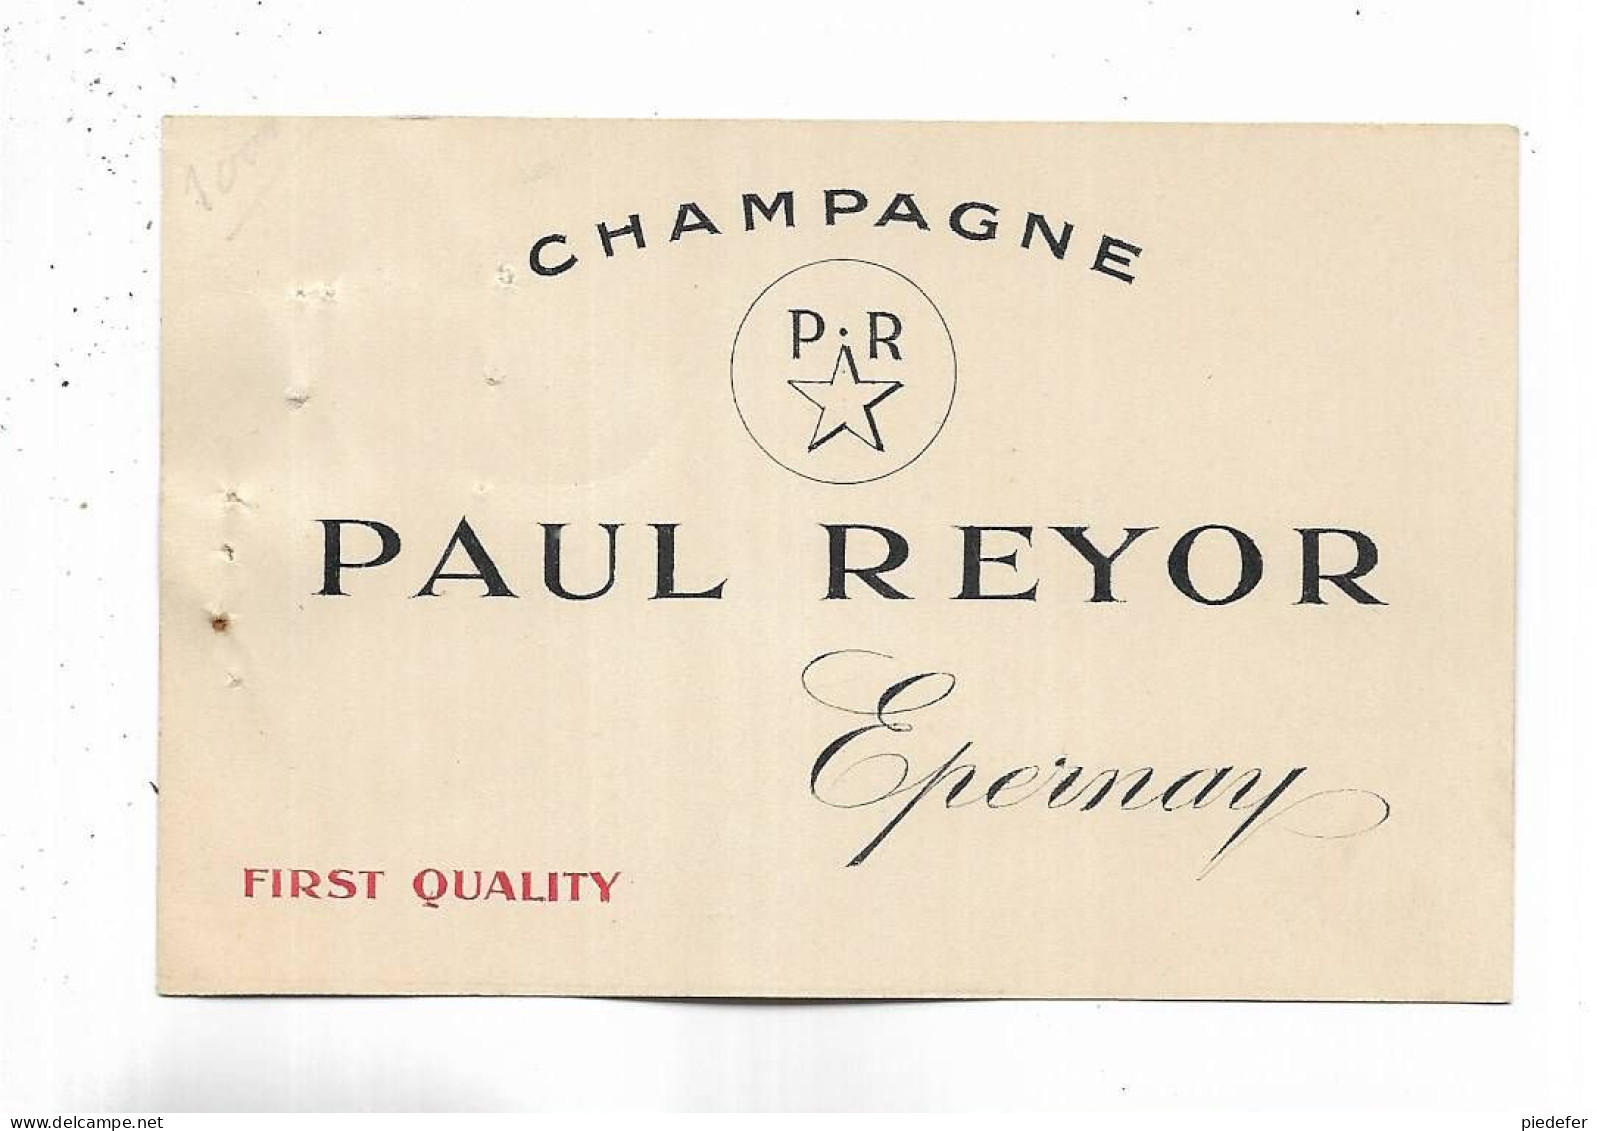 51 - Document Publicitaire " Champagne PAUL REYOR  First Quality  "  EPERNAY ( Marne ) - Advertising